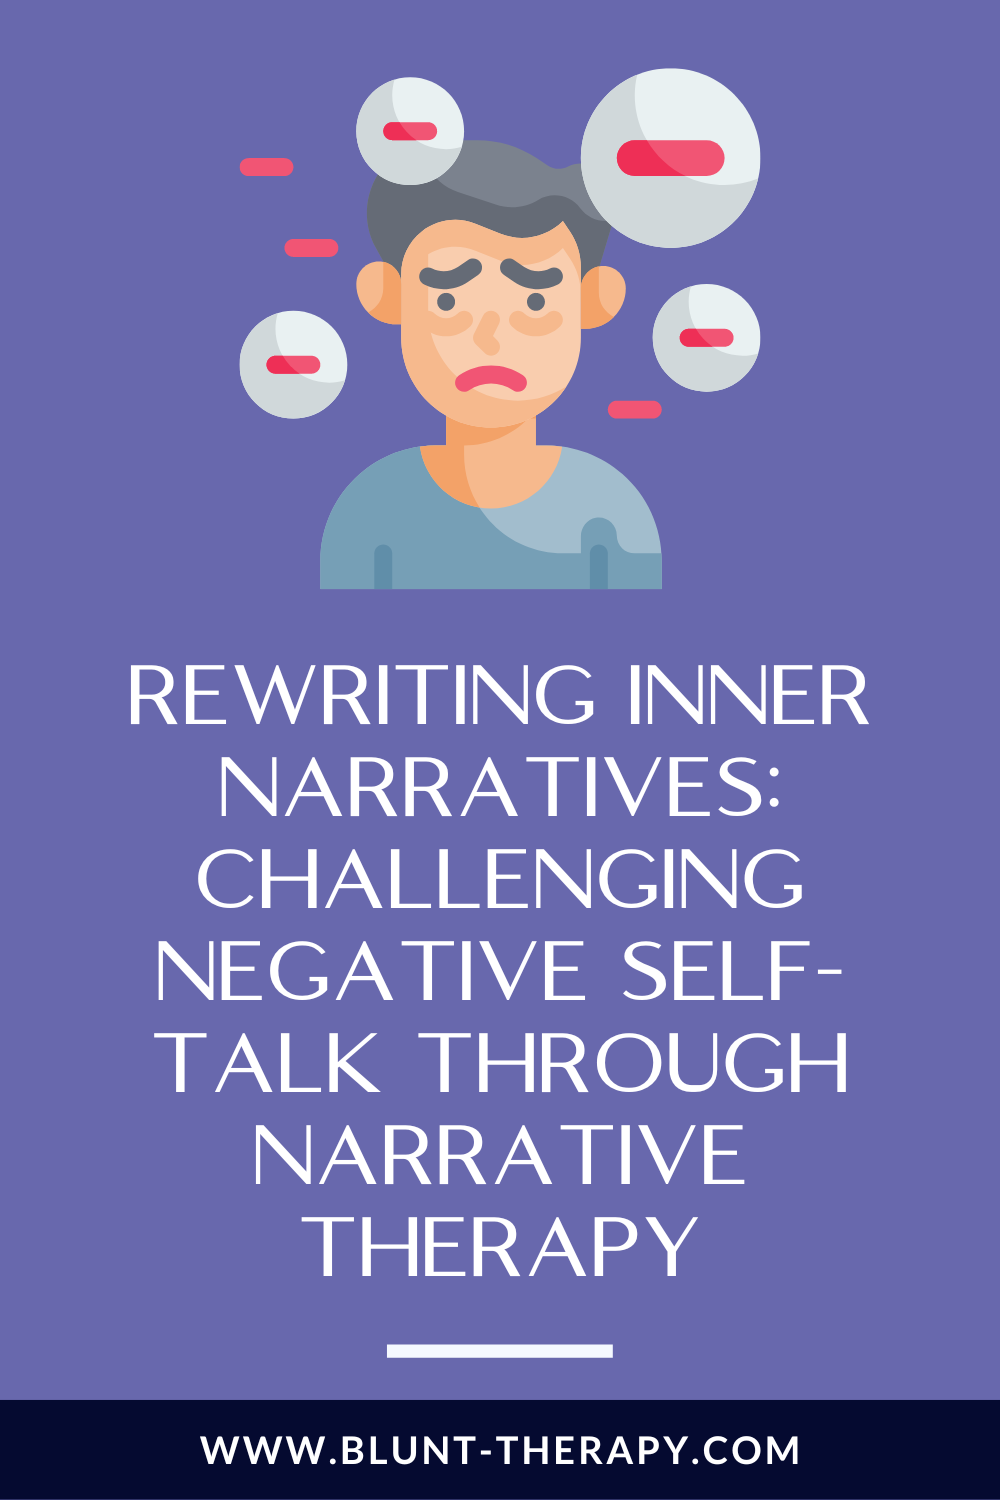 Rewriting Inner Narratives: Challenging Negative Self-Talk Through Narrative Therapy